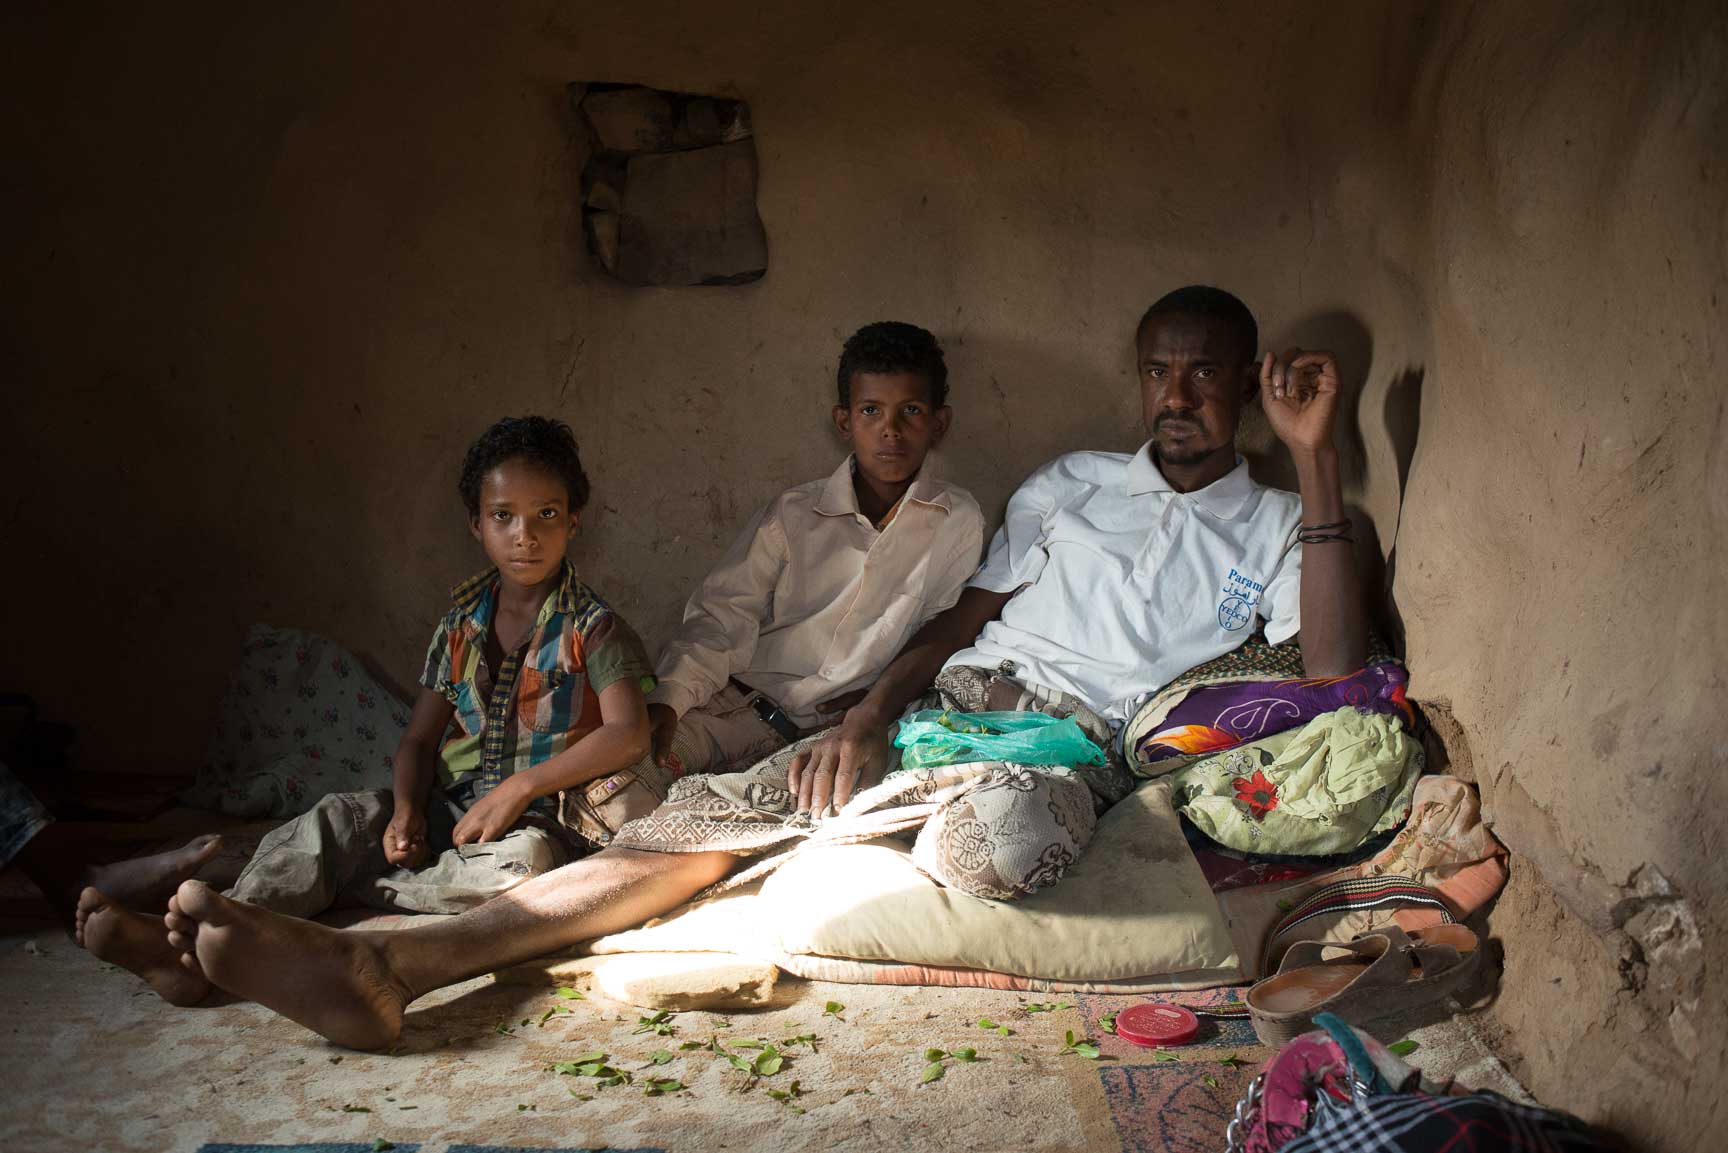 Fadhl Ahmad, a guard for the qat fields, sits with his two sons in his home on July 22, 2015. Since the war started, there has been no diesel to pump the water to water the qat, so he’s had no work.